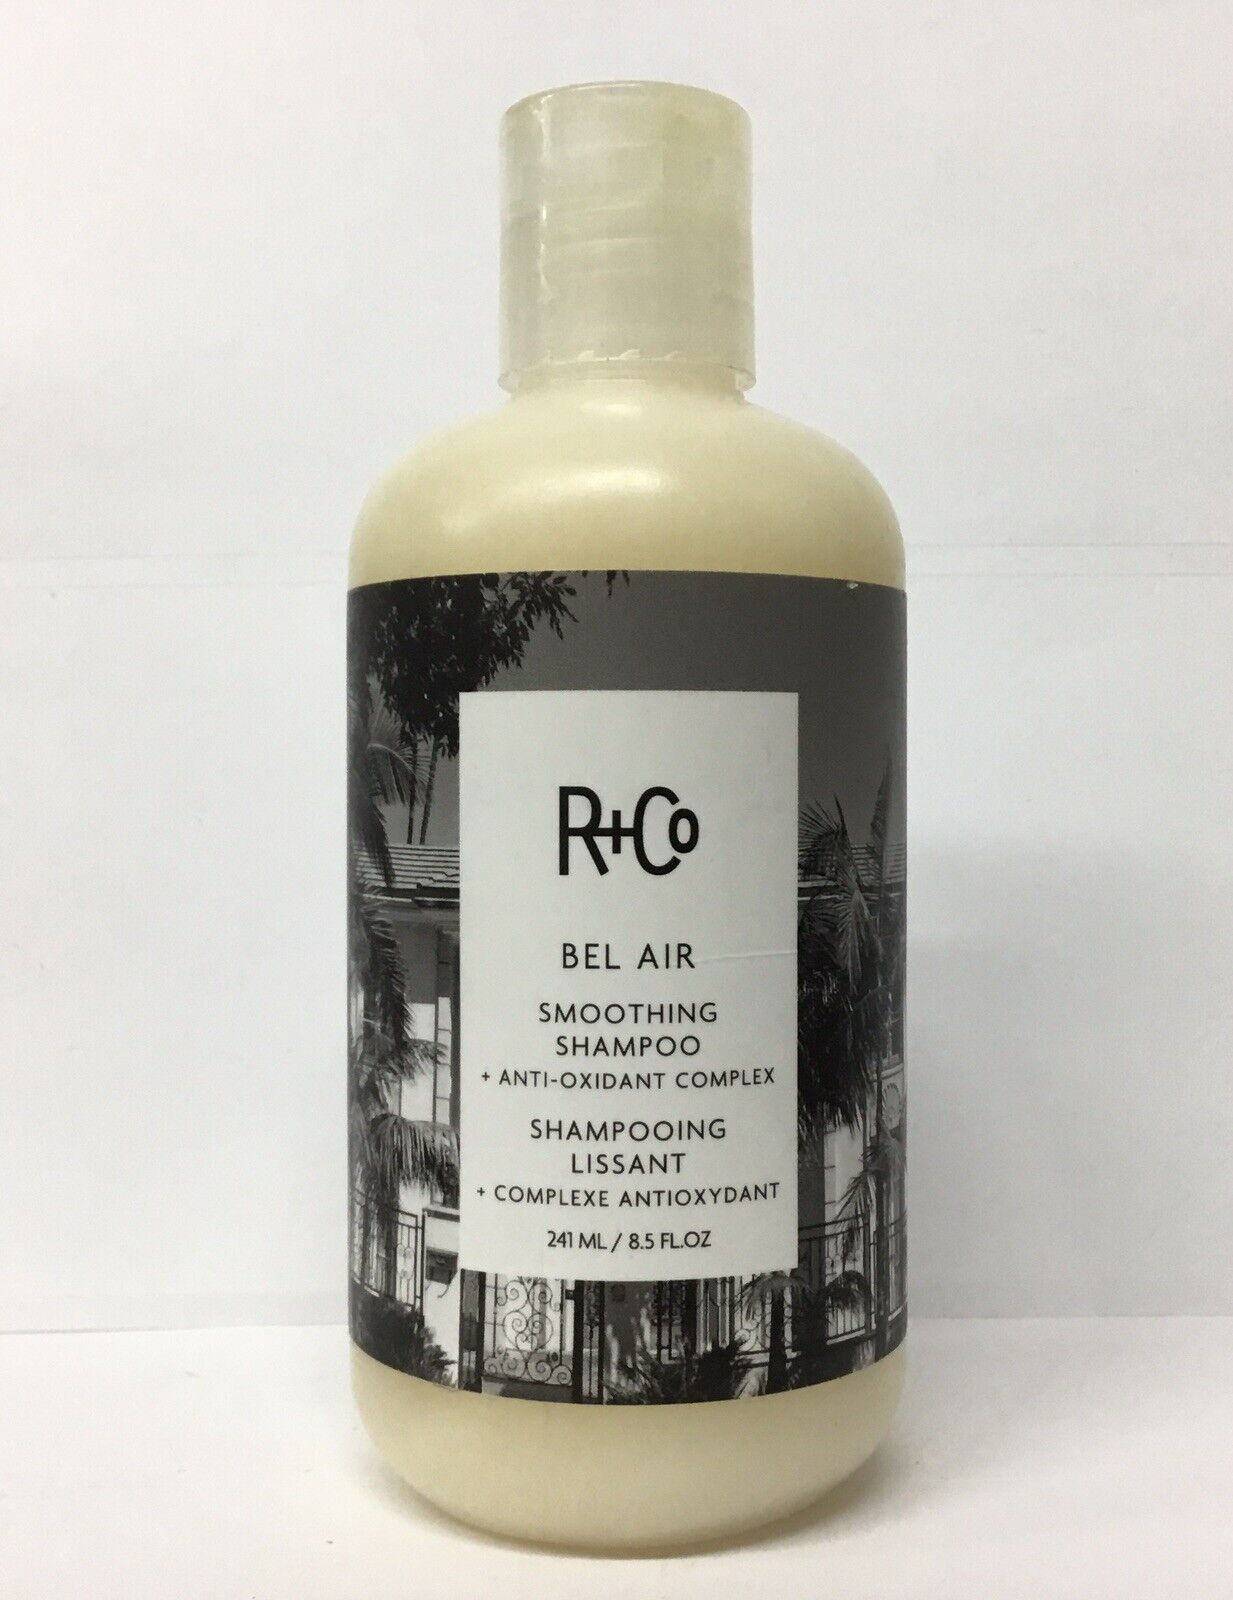 R+Co Bel Air Smoothing Shampoo+Anti-oxidant Complex 8.5 Oz As Pictured